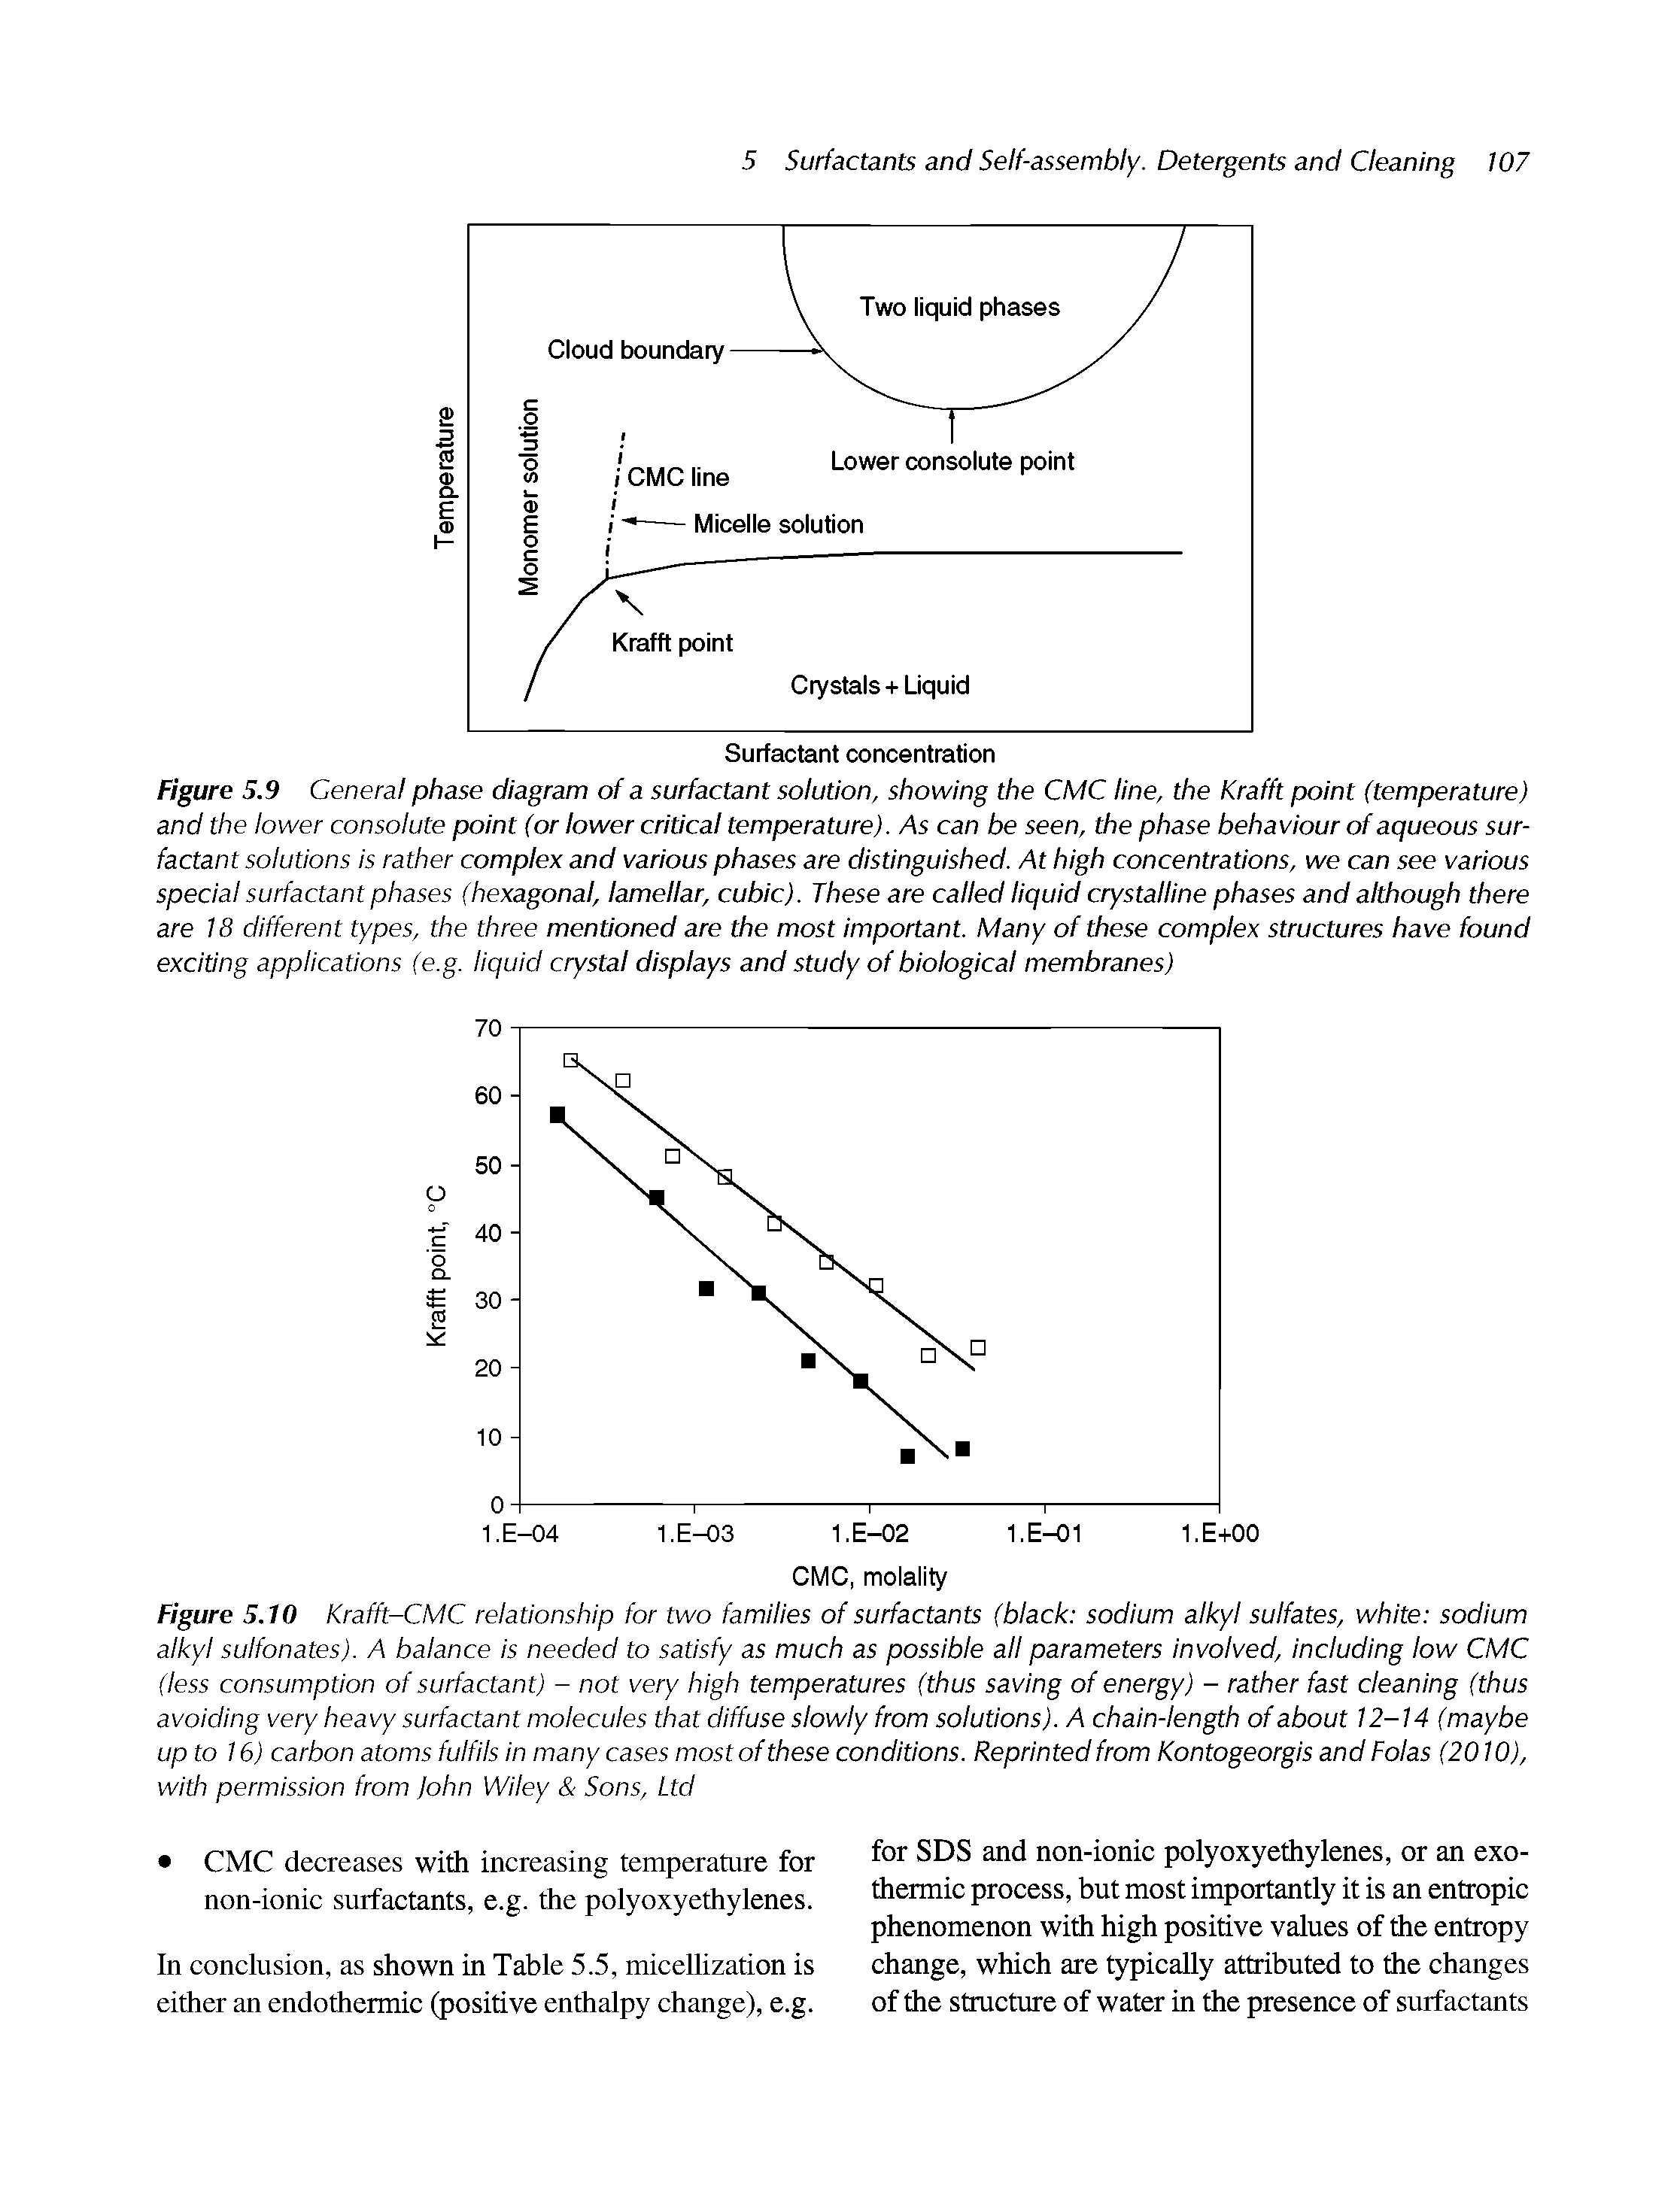 Figure 5.10 Krafft-CMC relationship for two families of surfactants (black sodium alkyl sulfates, white sodium alkyl sulfonates). A balance is needed to satisfy as much as possible all parameters involved, including low CMC (less consumption of surfactant) - not very high temperatures (thus saving of energy) - rather fast cleaning (thus avoiding very heavy surfactant molecules that diffuse slowly from solutions). A chain-length of about 12-14 (maybe upto 16) carbon atoms fulfils in many cases most of these conditions. Reprinted from Kontogeorgis and Folas (2010), with permission from john Wiley Sons, Ltd...